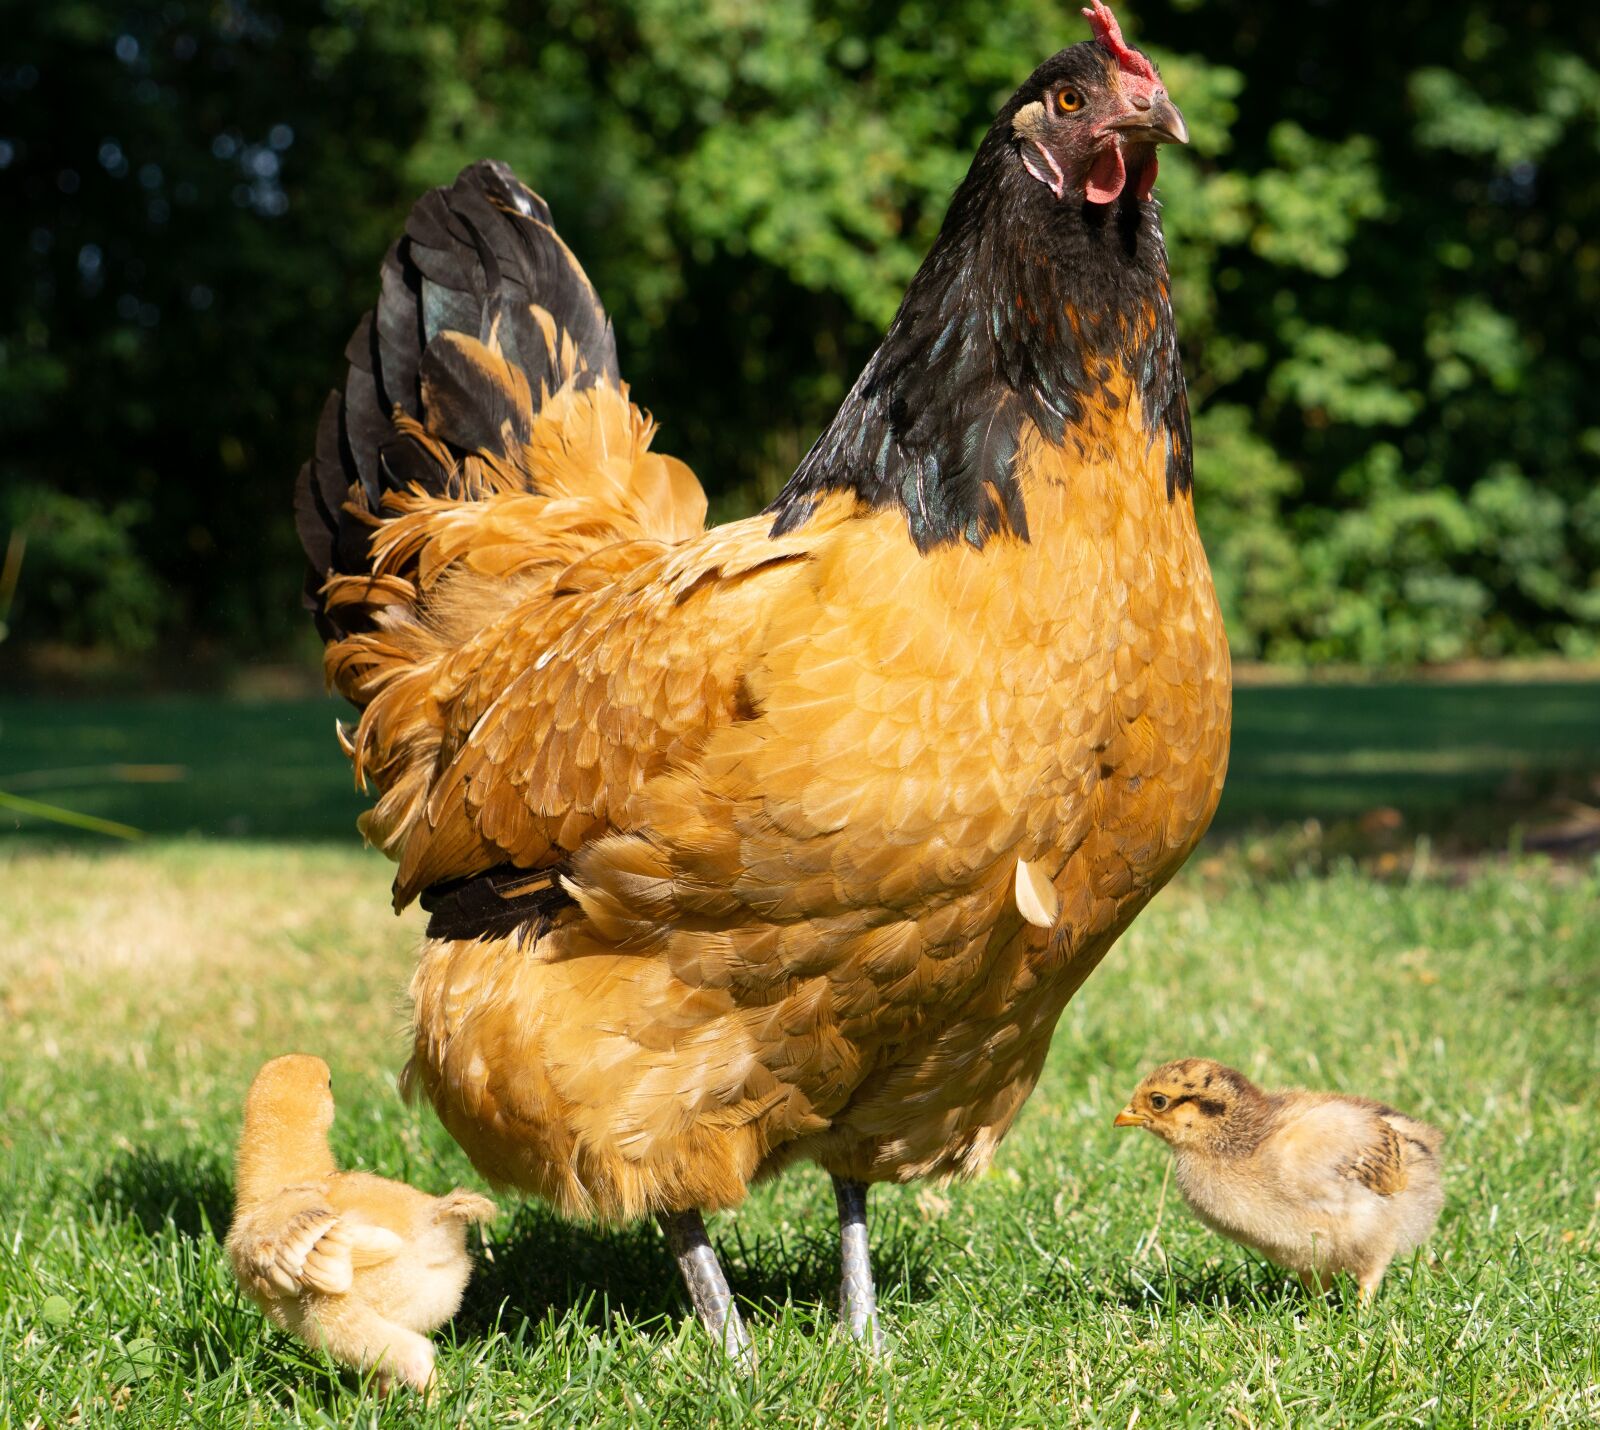 Sony a6000 sample photo. Chicken, chick, poultry photography